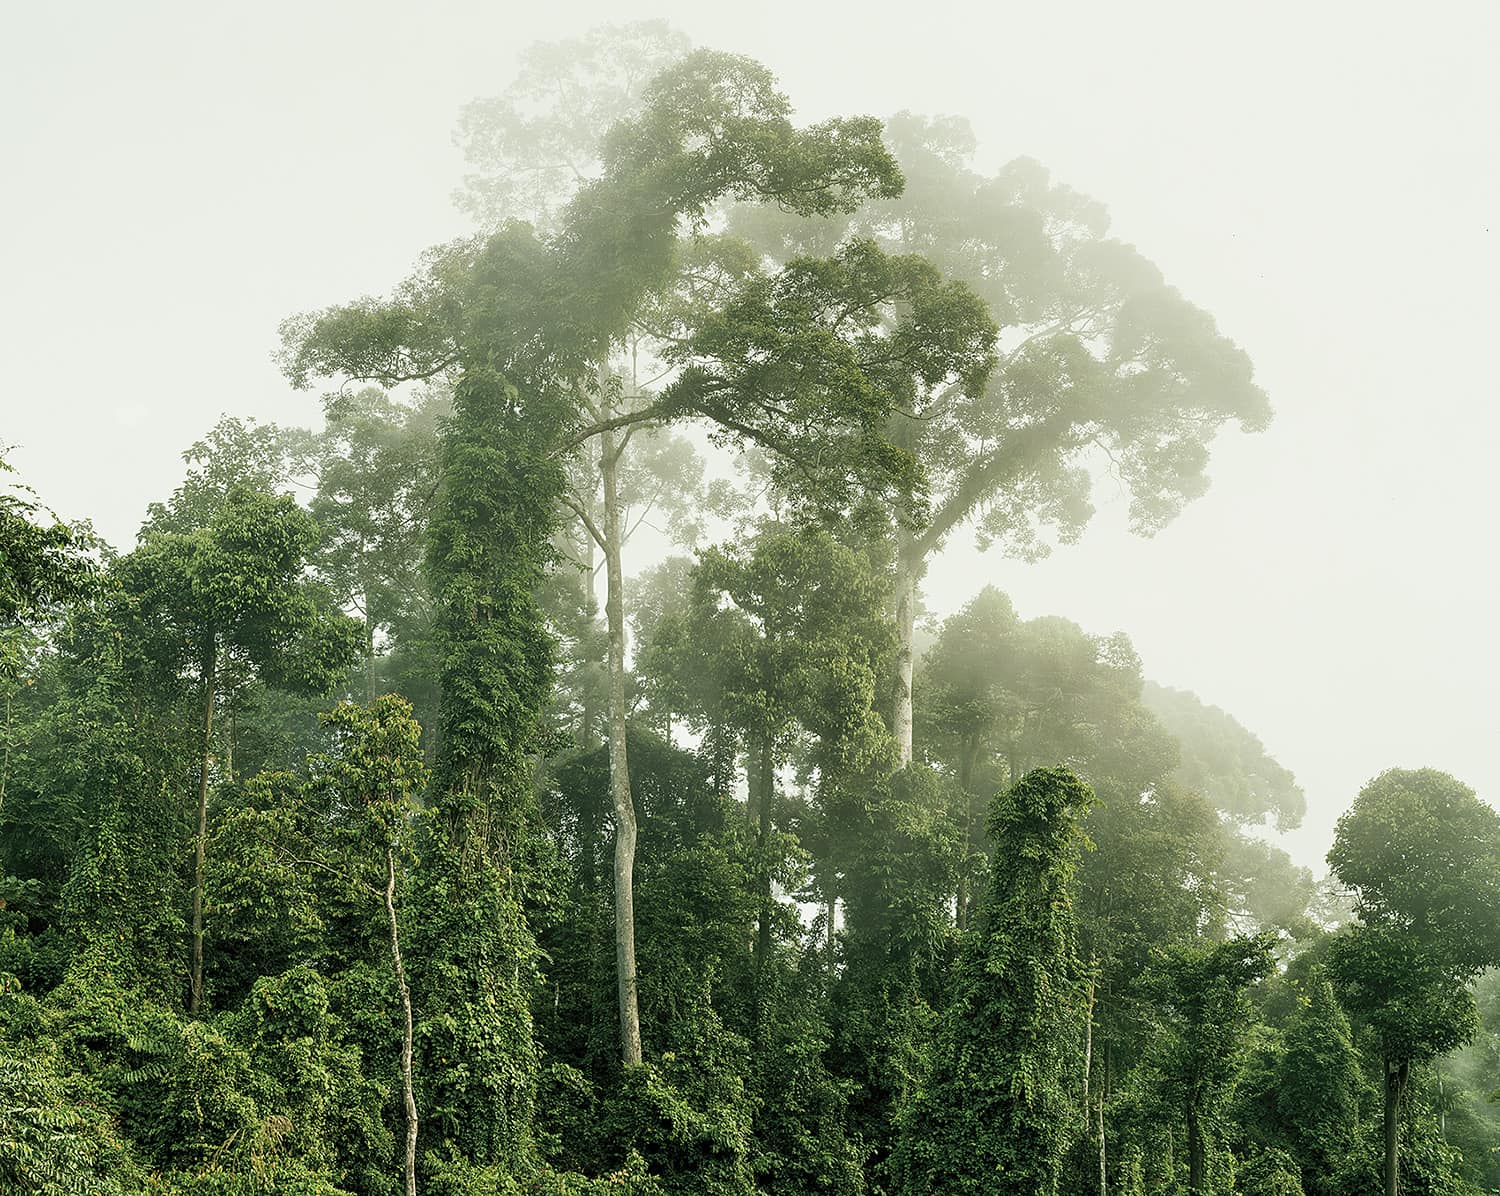 Primary Forest 5, Malaysia, 10/2012 Olaf Otto Becker